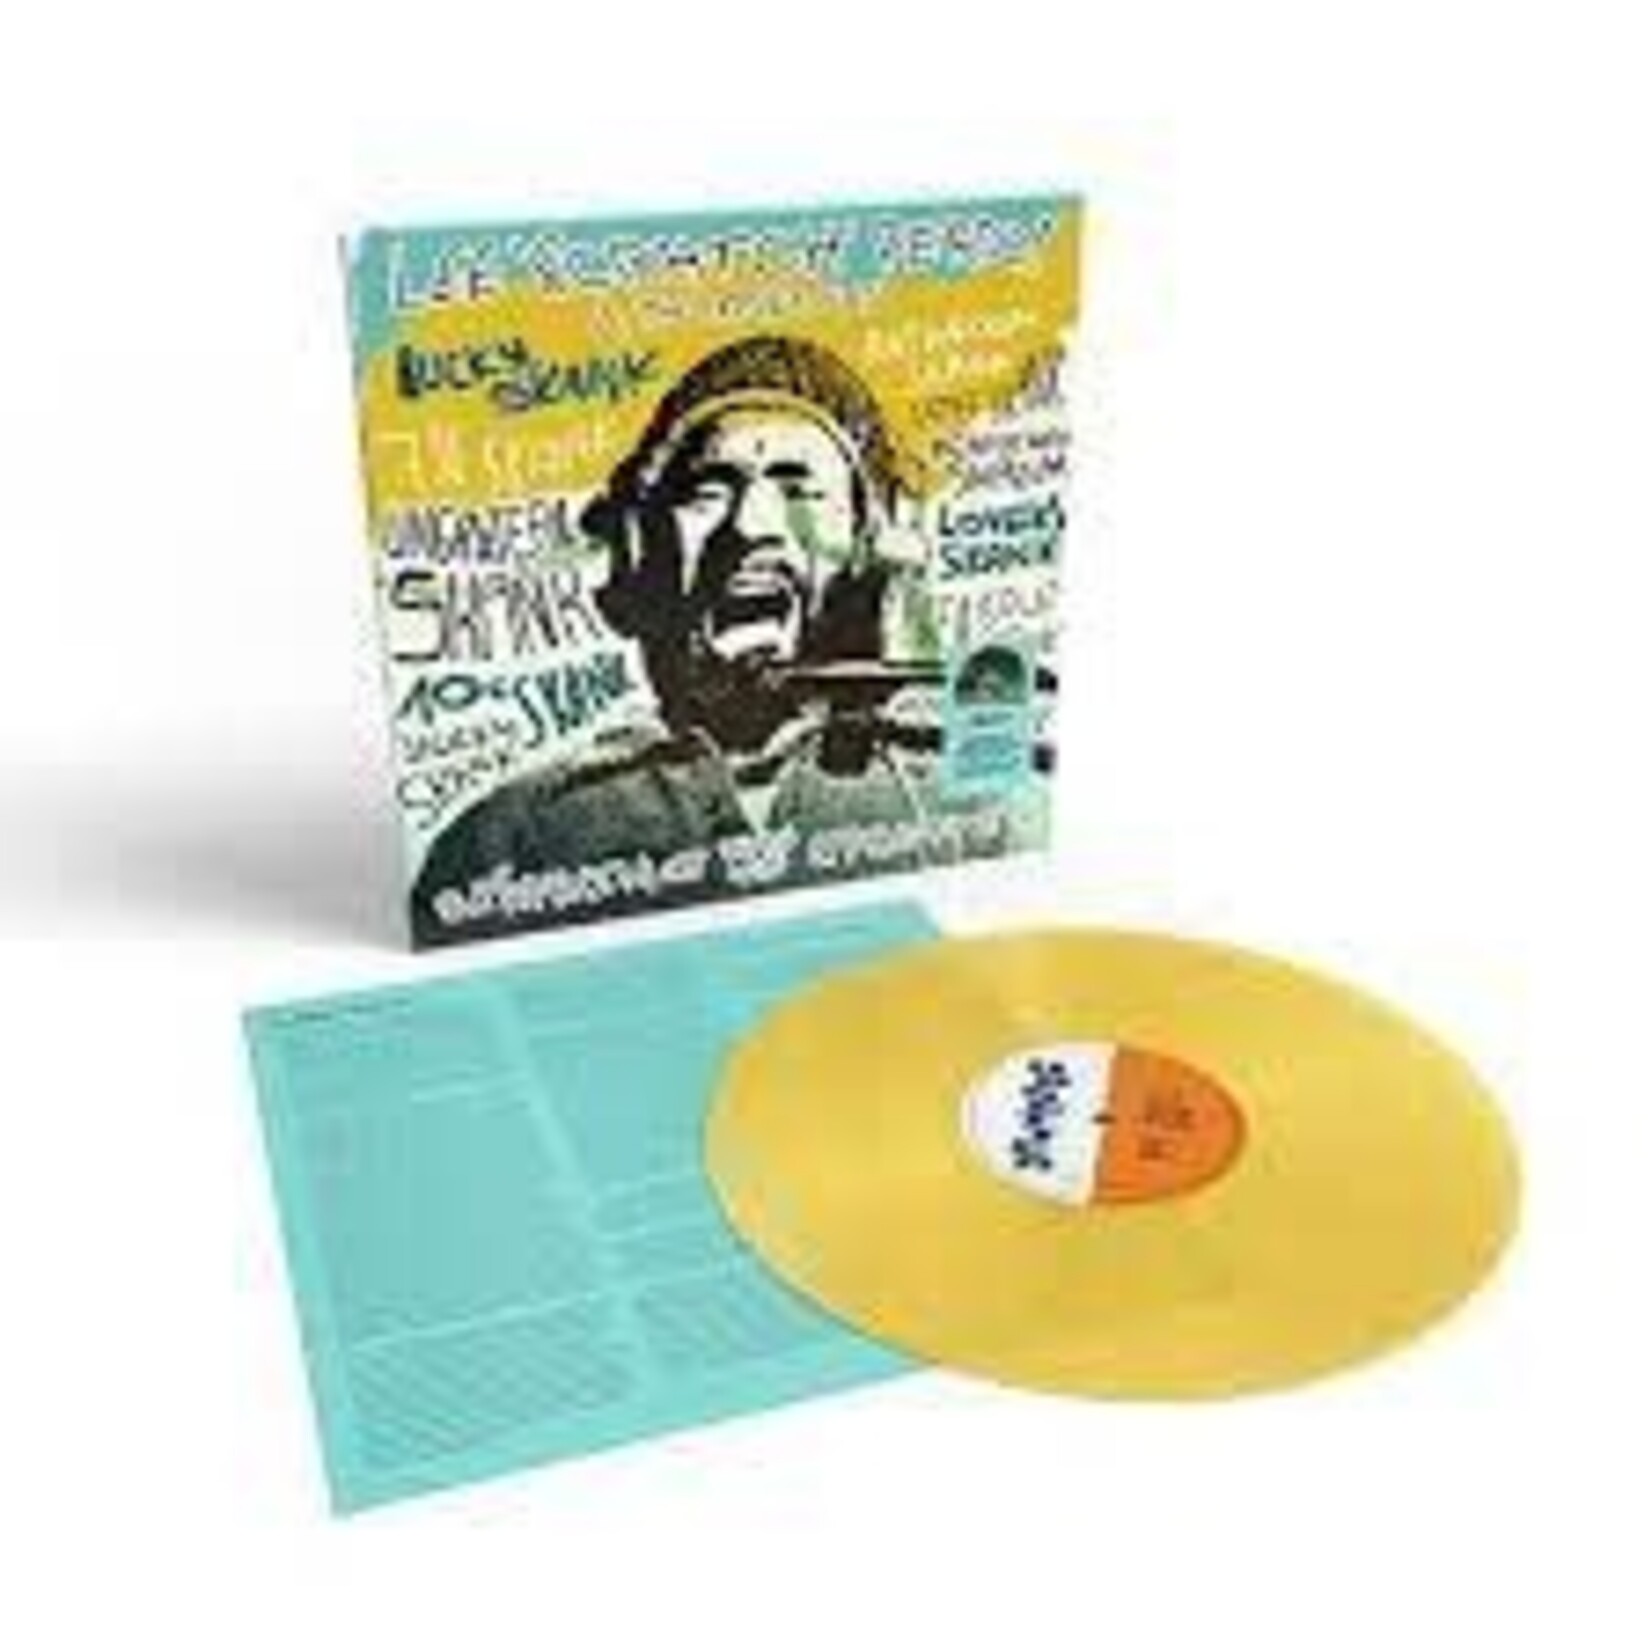 LEE ""SCRATCH"" PERRY - SKANKING W THE UPSETTER 1LP